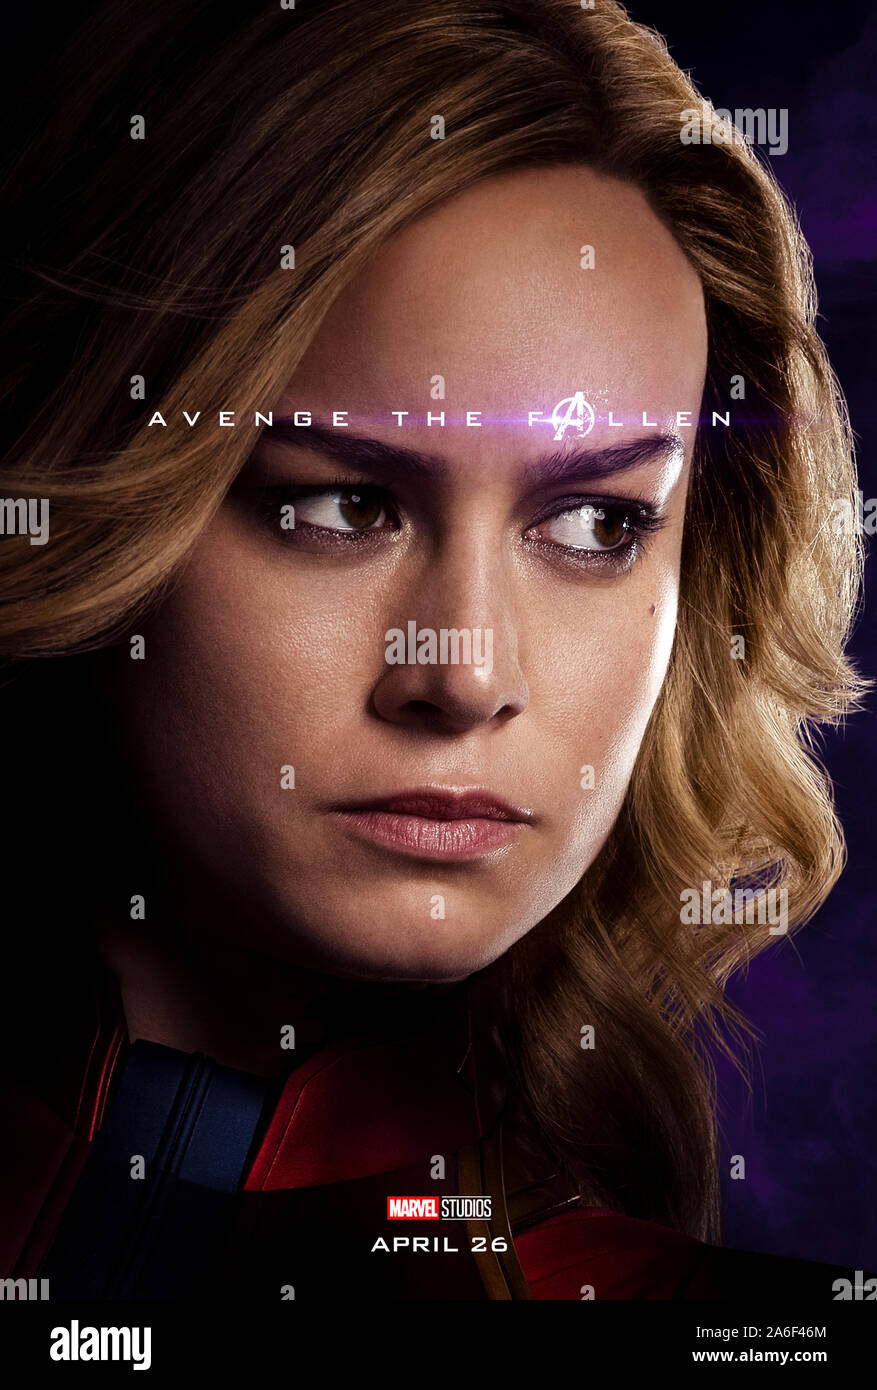 Character advance poster for Avengers: Endgame (2019) directed  by Anthony and Joe Russo starring Brie Larson as Carol Danvers / Captain Marvel. The epic conclusion and 22nd film in the Marvel Cinematic Universe. Stock Photo